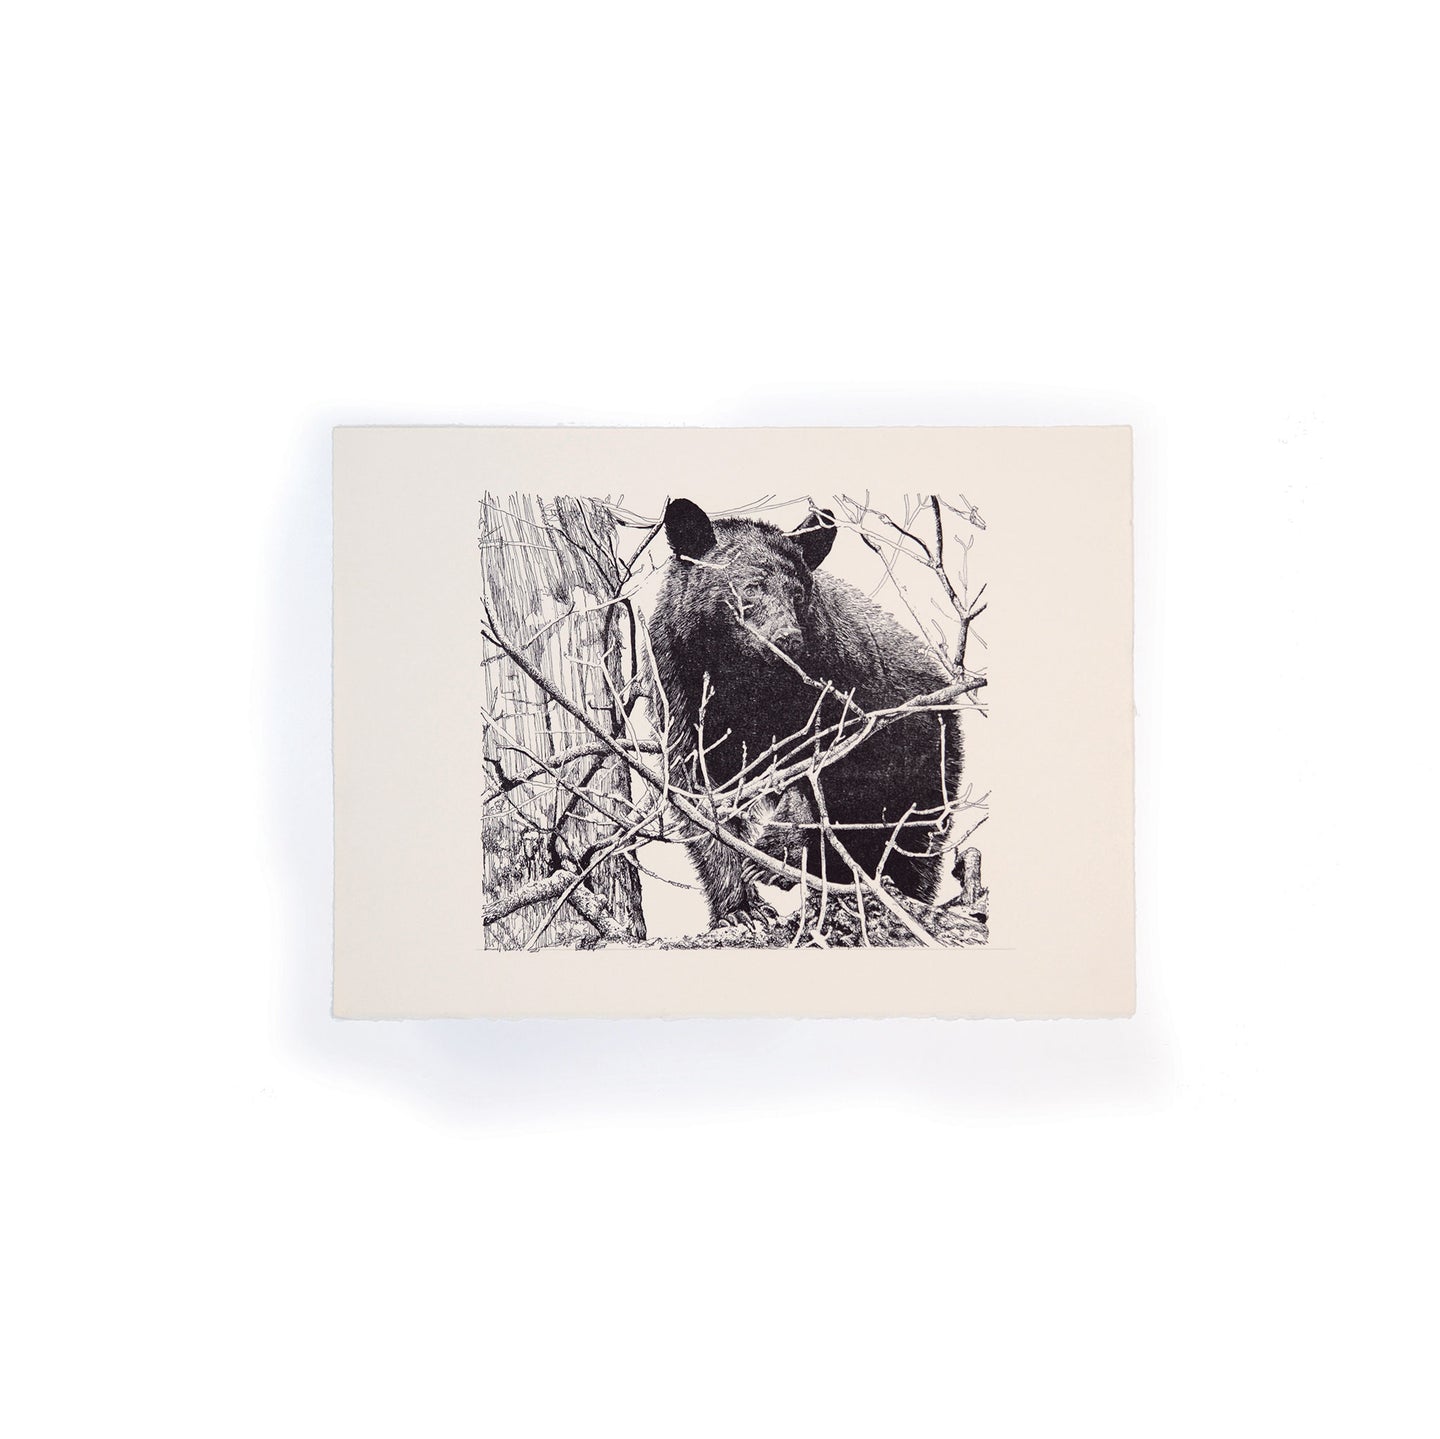 Black bear in tree engraving, Great Smoky Mountain National Park, Tennessee